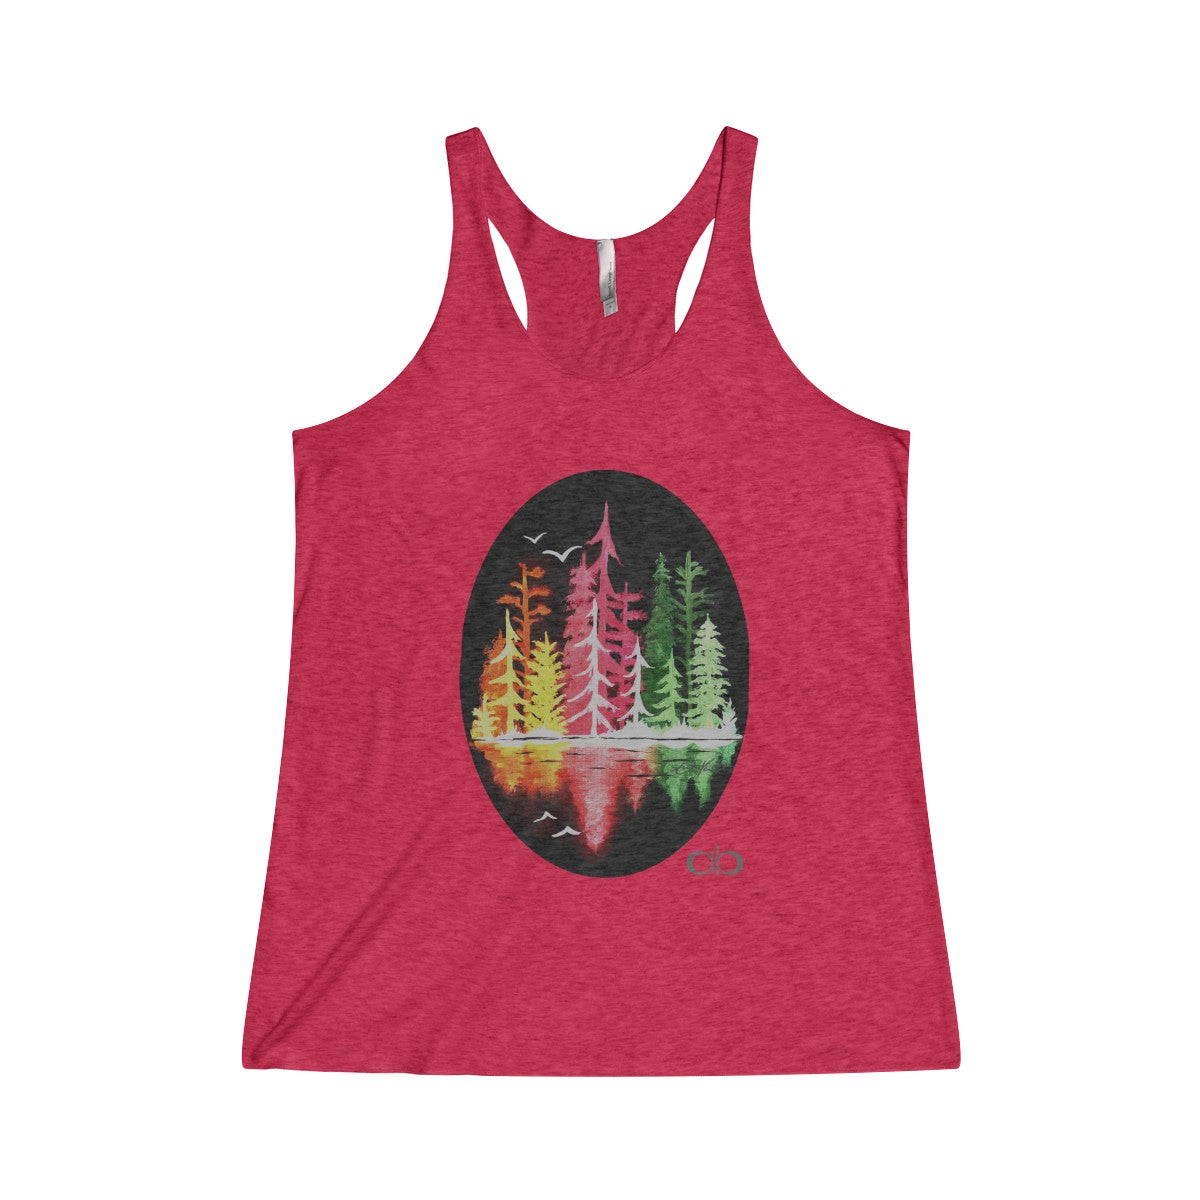 Can You Be More Pacific: Women's Tri-Blend Racerback Tank